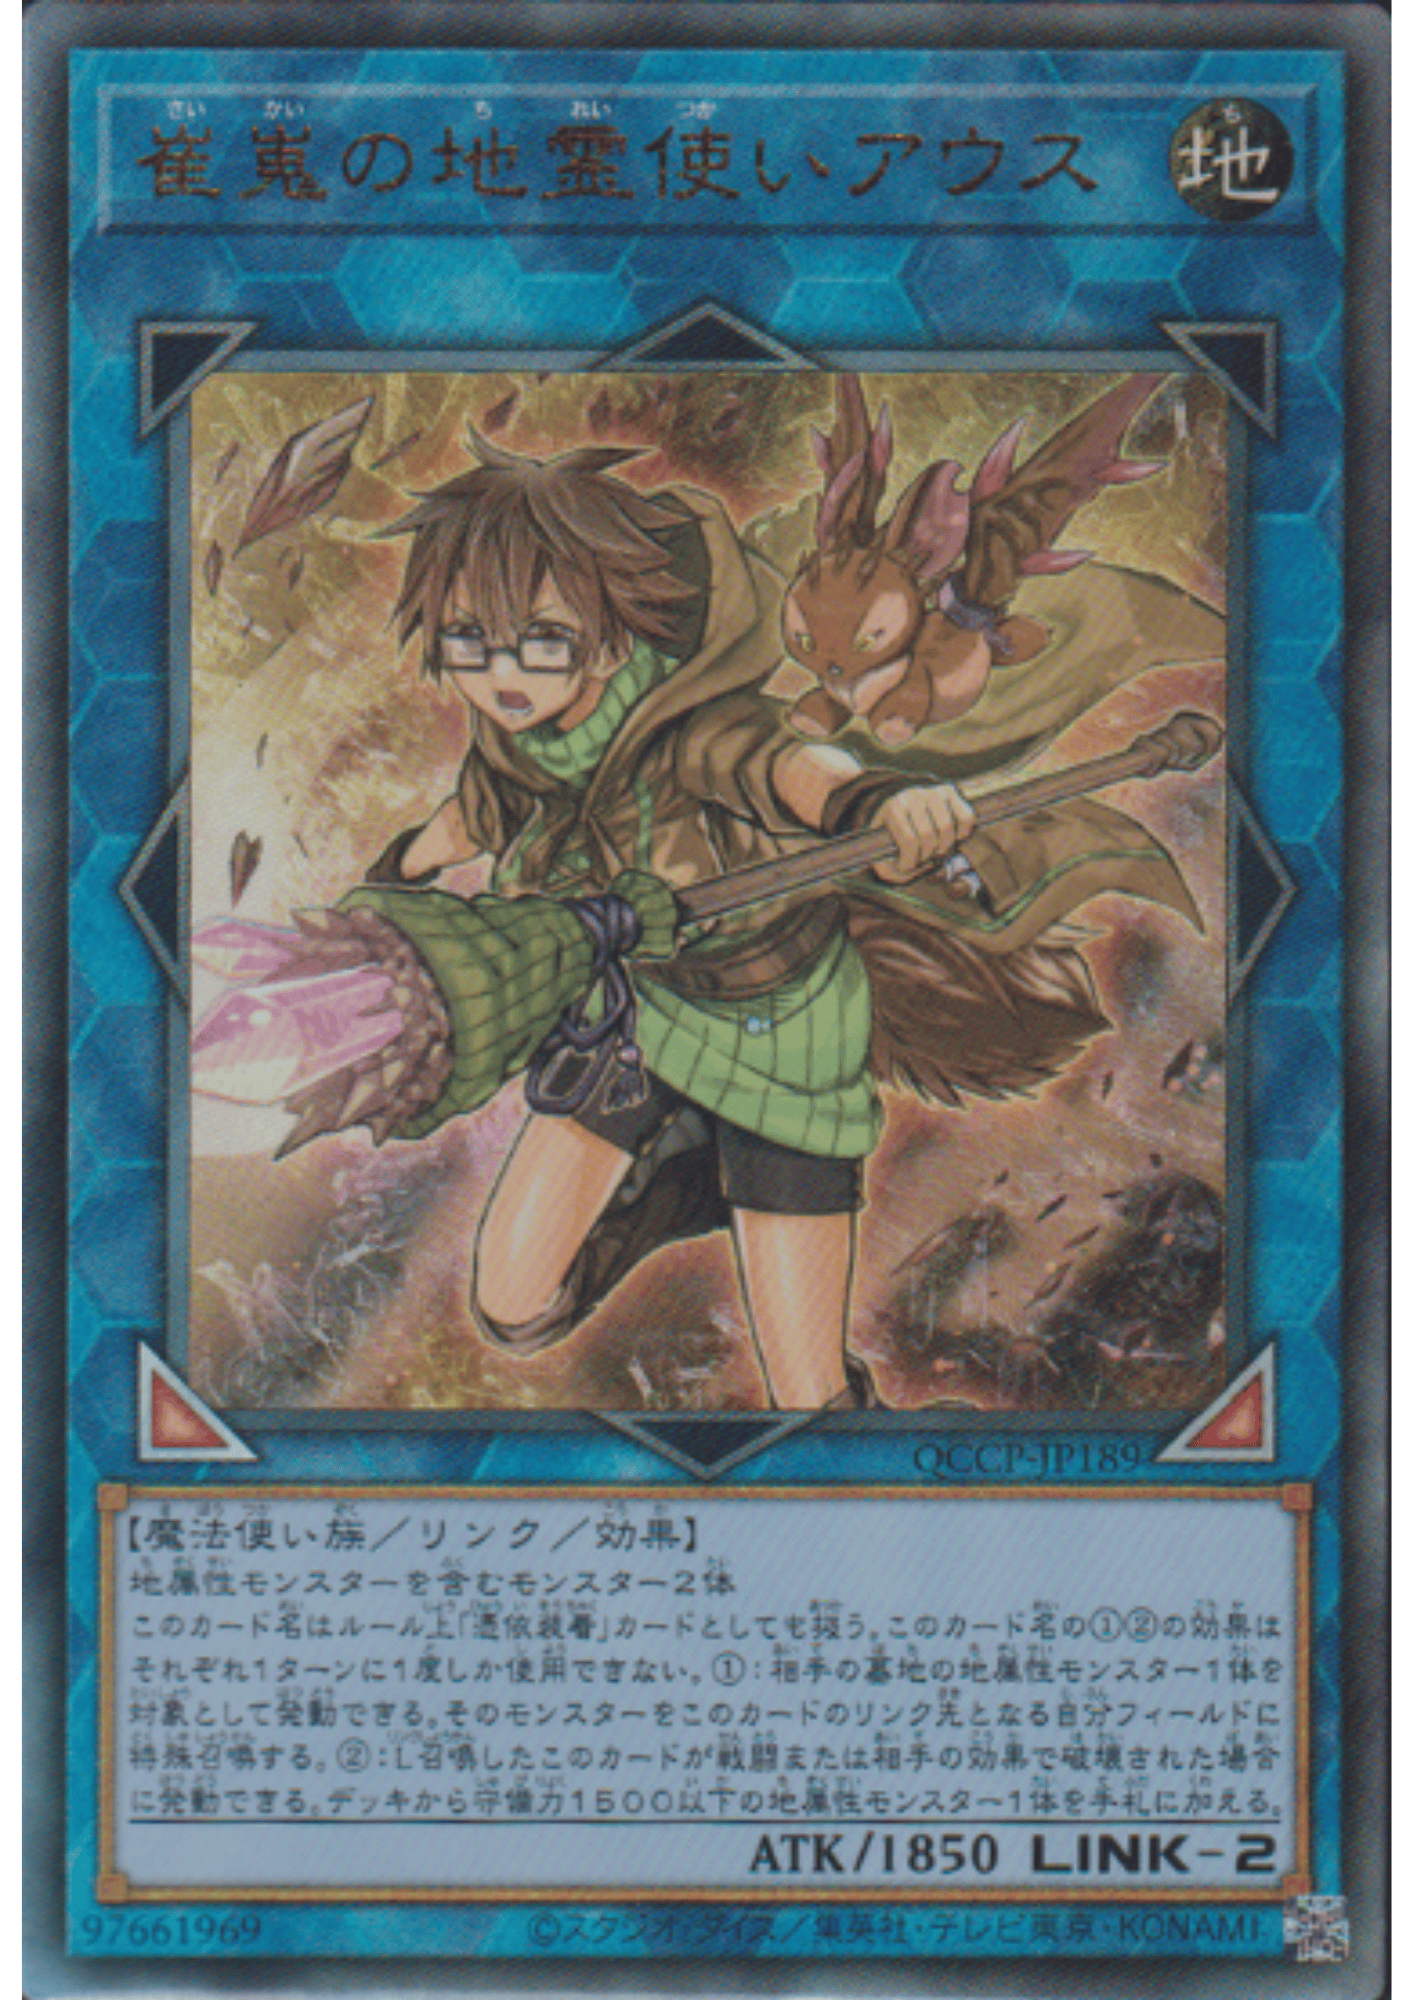 Aussa the Earth Charmer, Immovable QCCP-JP189 | Quarter Century Chronicle side:Pride